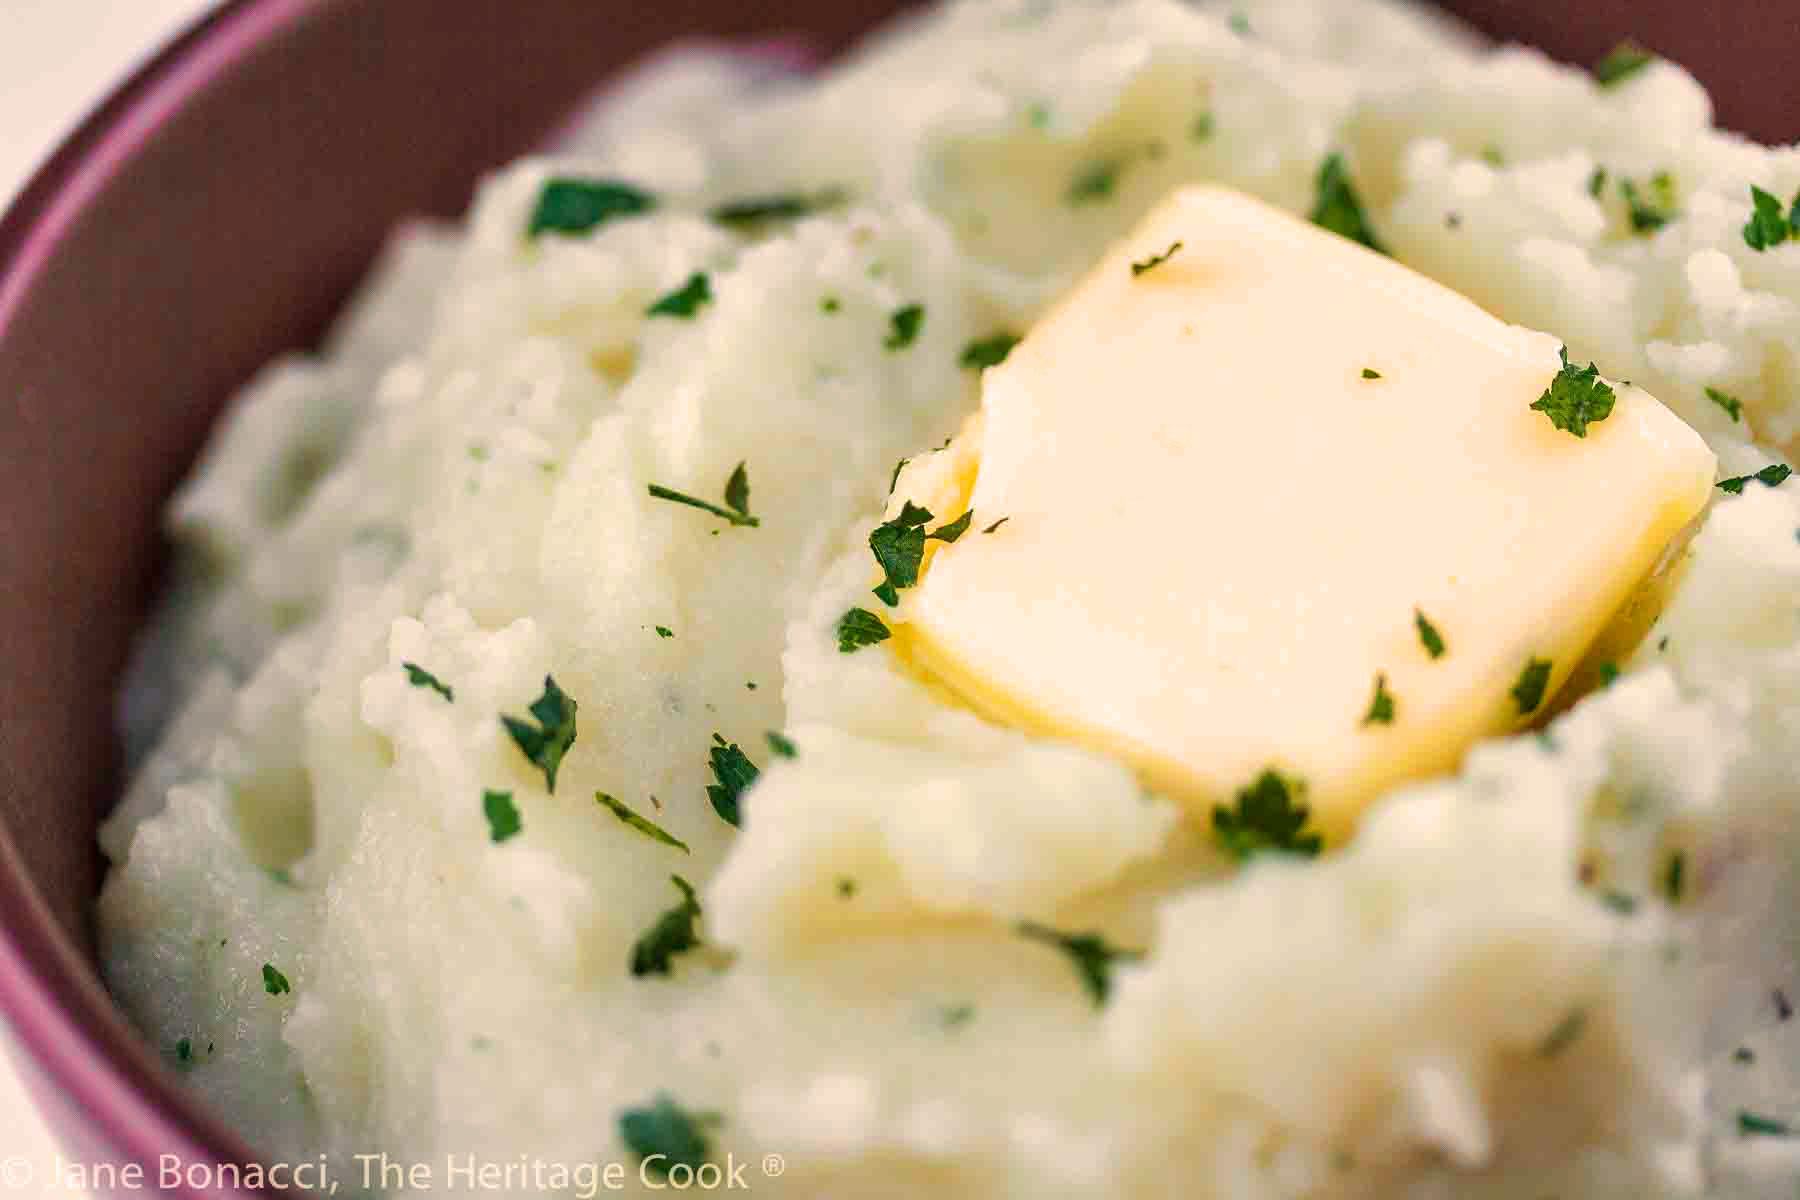 Bowl of piping hot mashed potatoes with a pat of butter on top and sprinkled with chopped parsley.